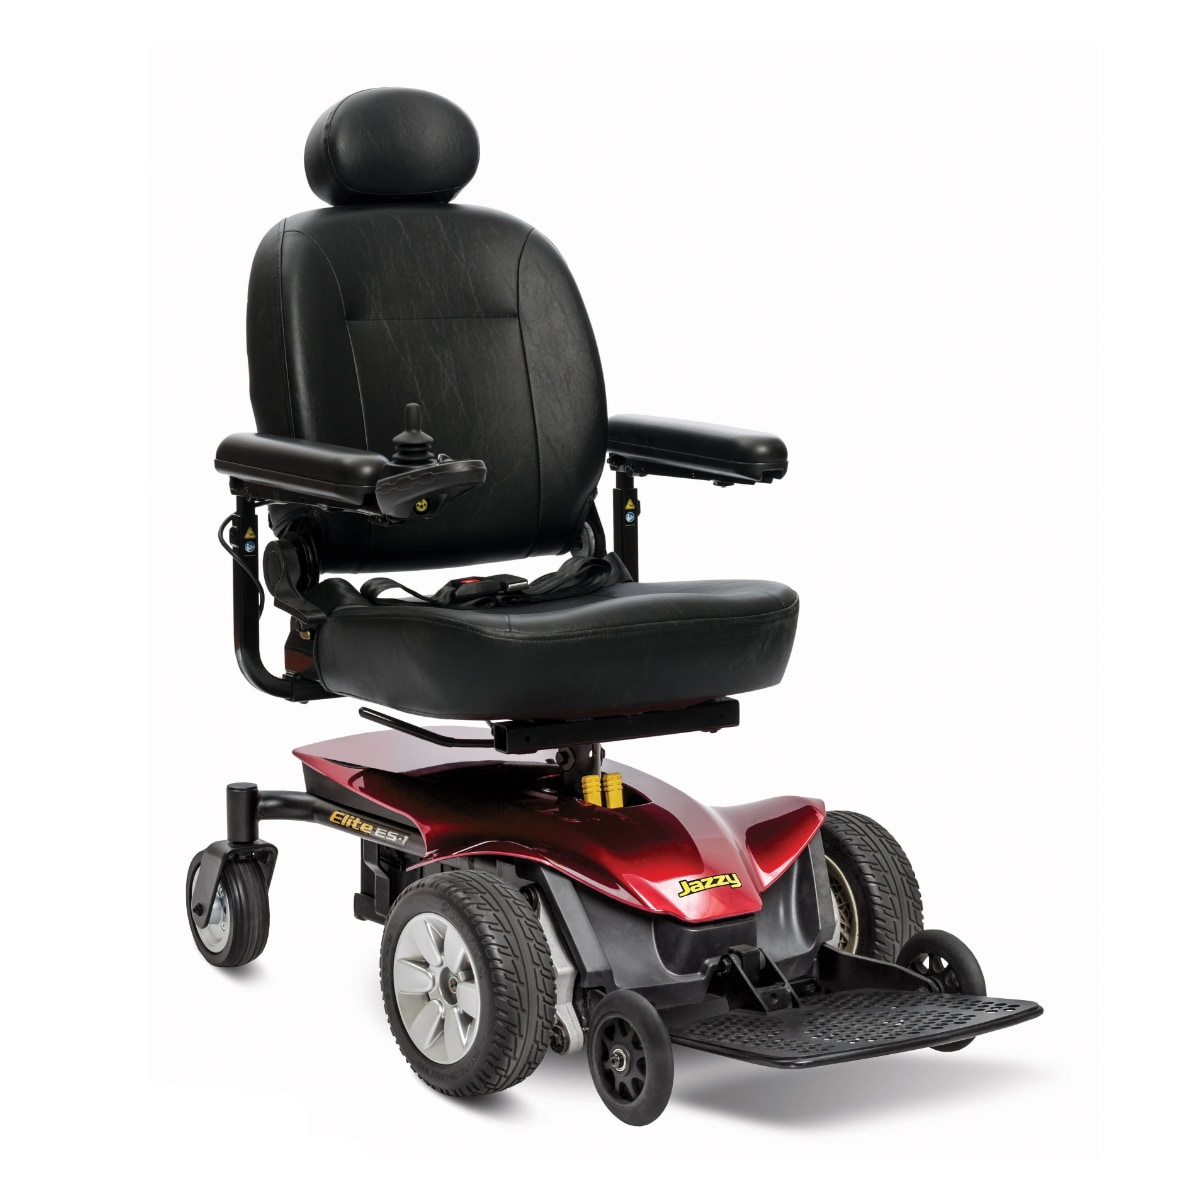 Power chair with black captain's chair and a red base